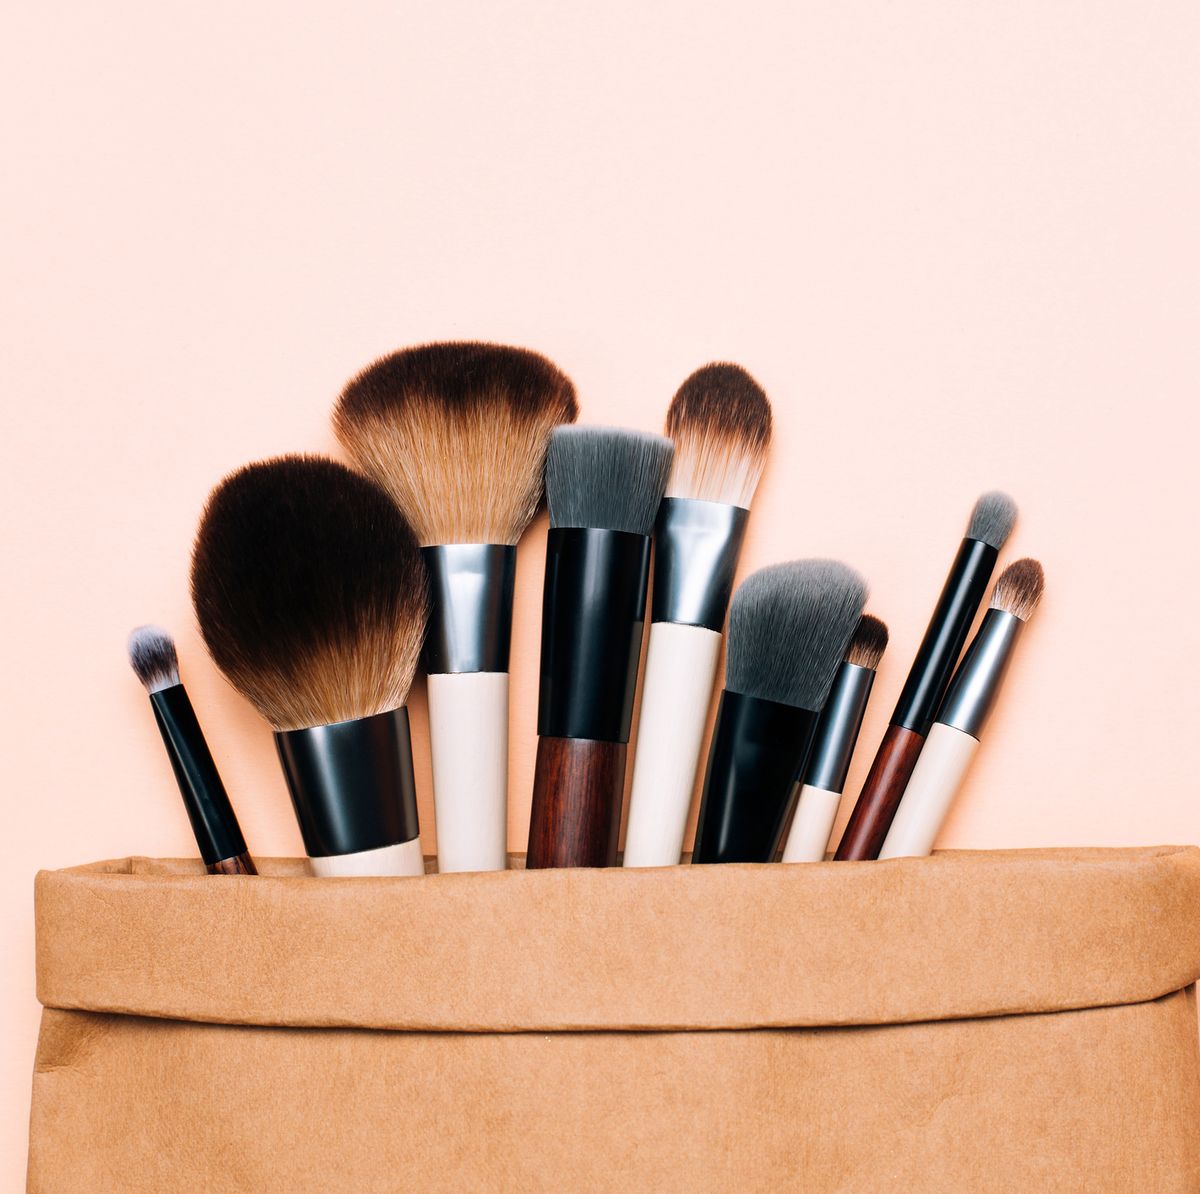 Cleaning Your Brushes (+3 Brush Care Tips)